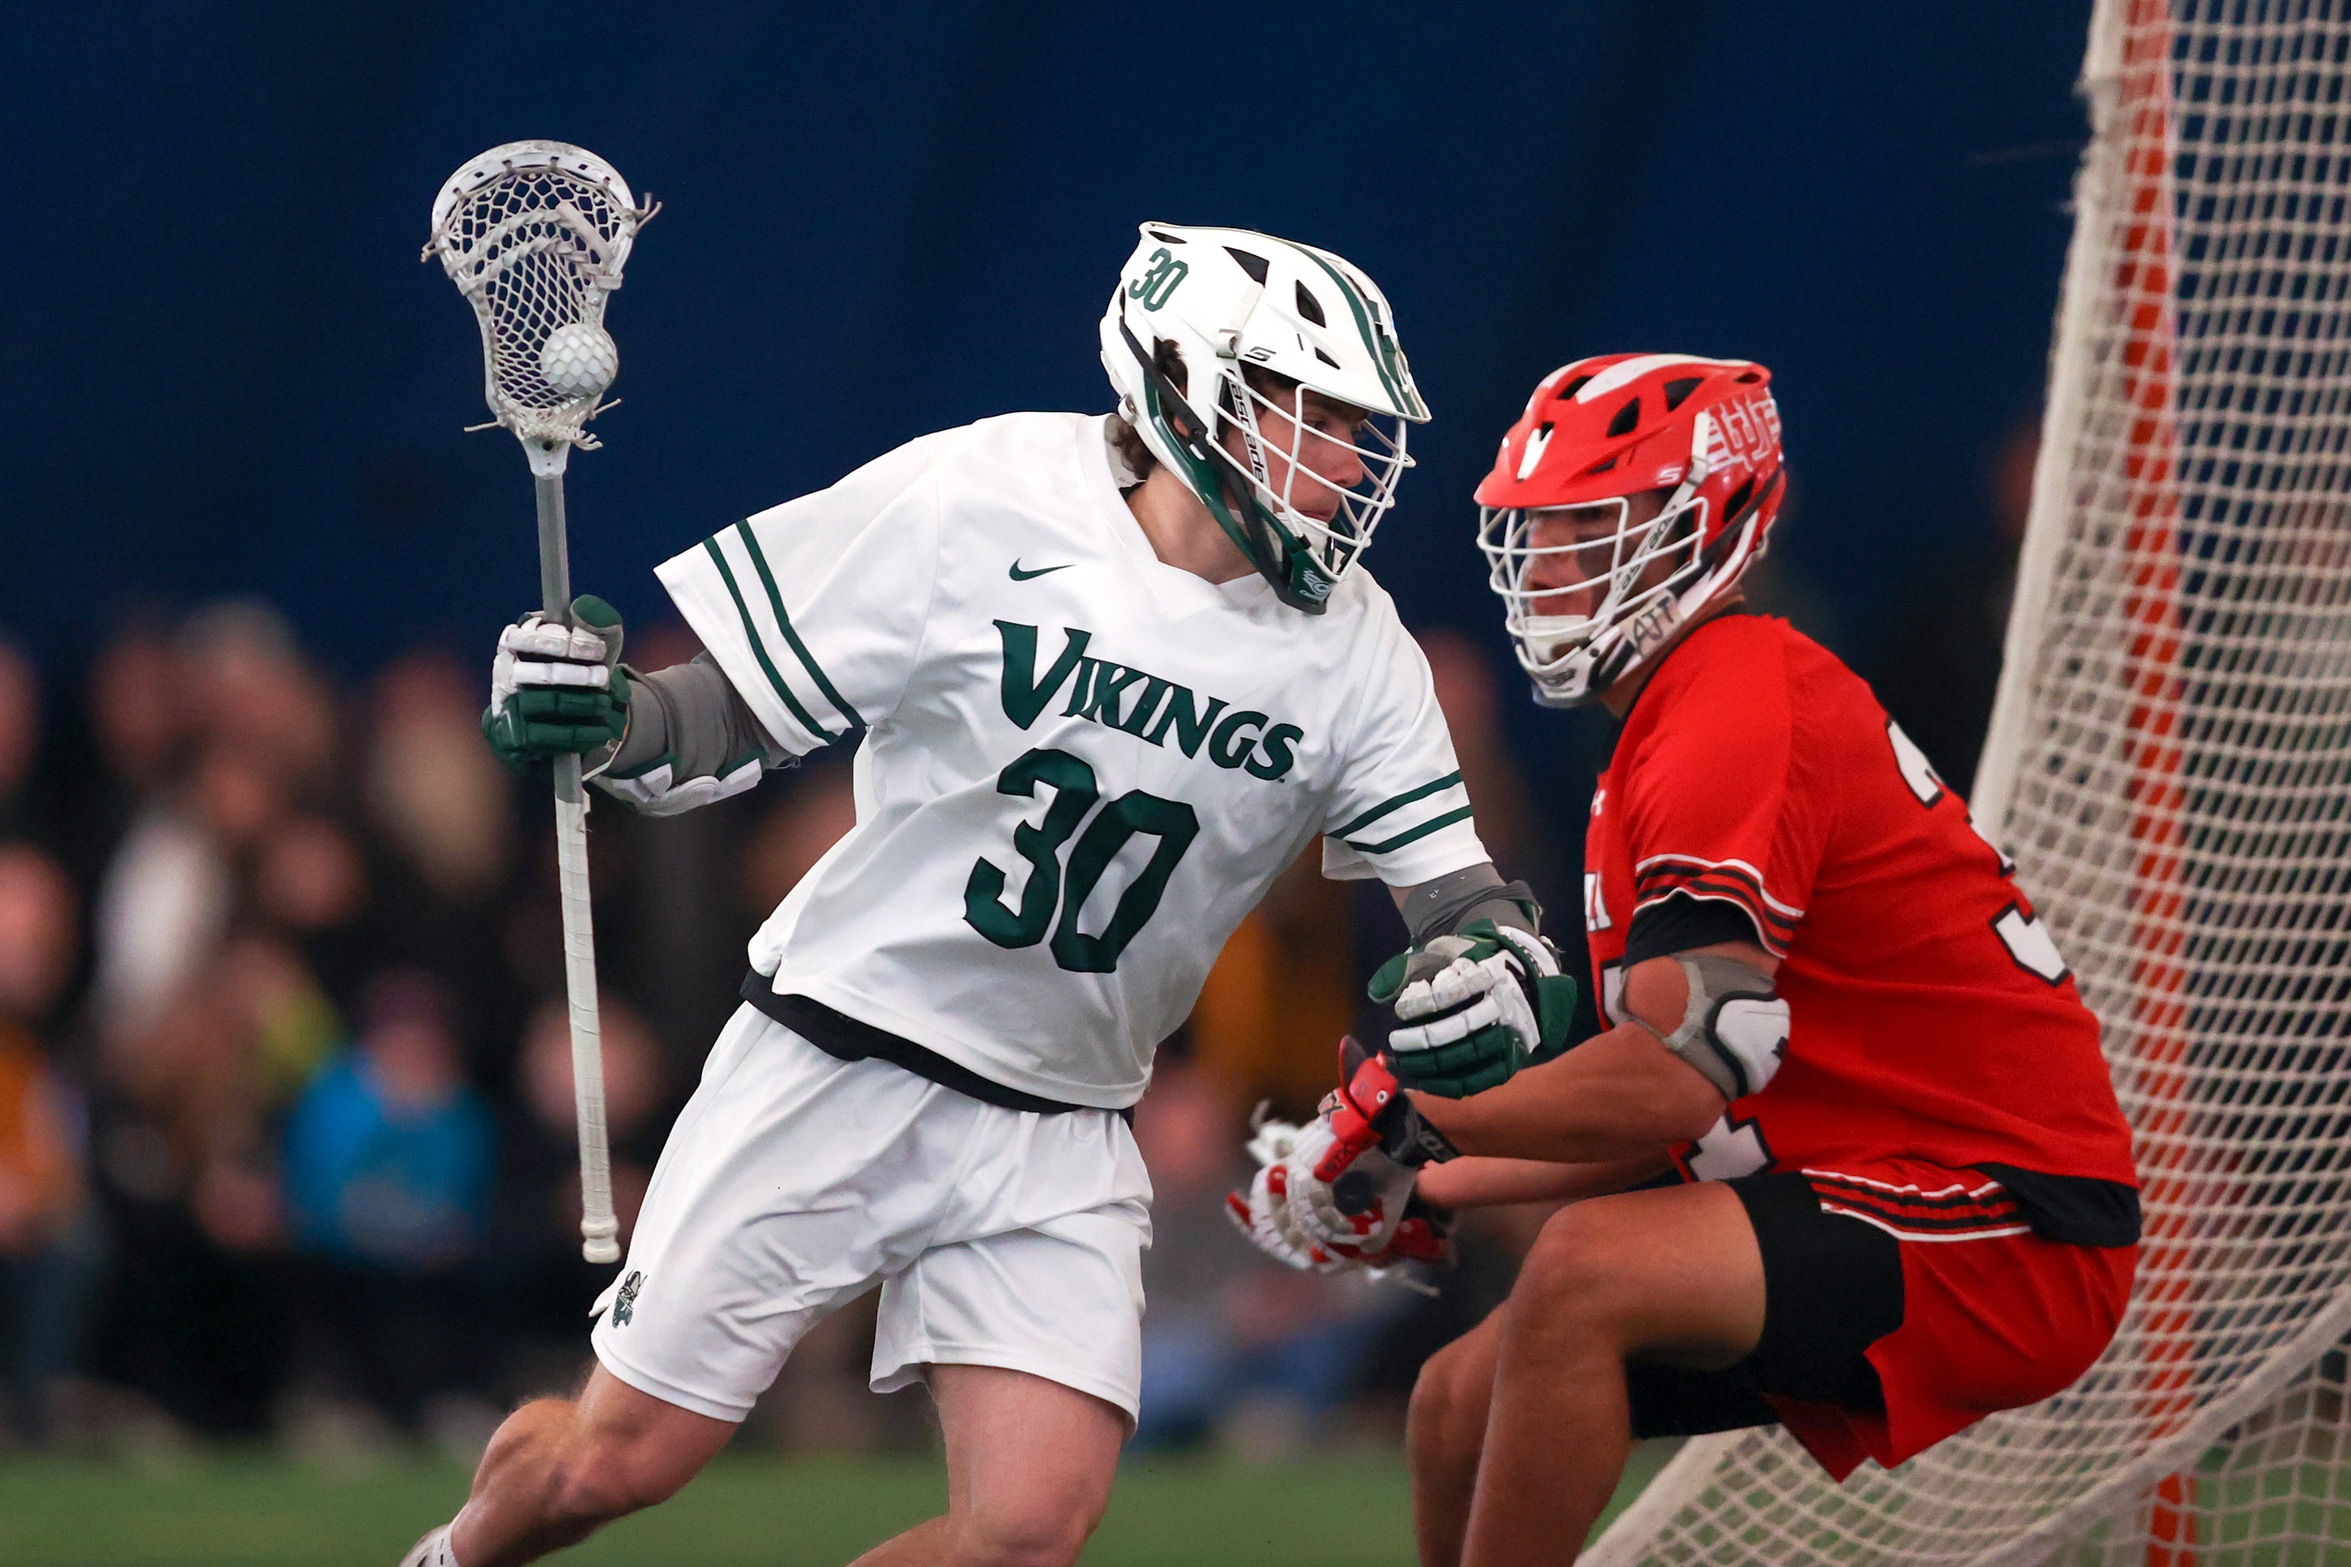 Cleveland State Lacrosse Gets off to Fast Start but Falls to Utah, 15-11